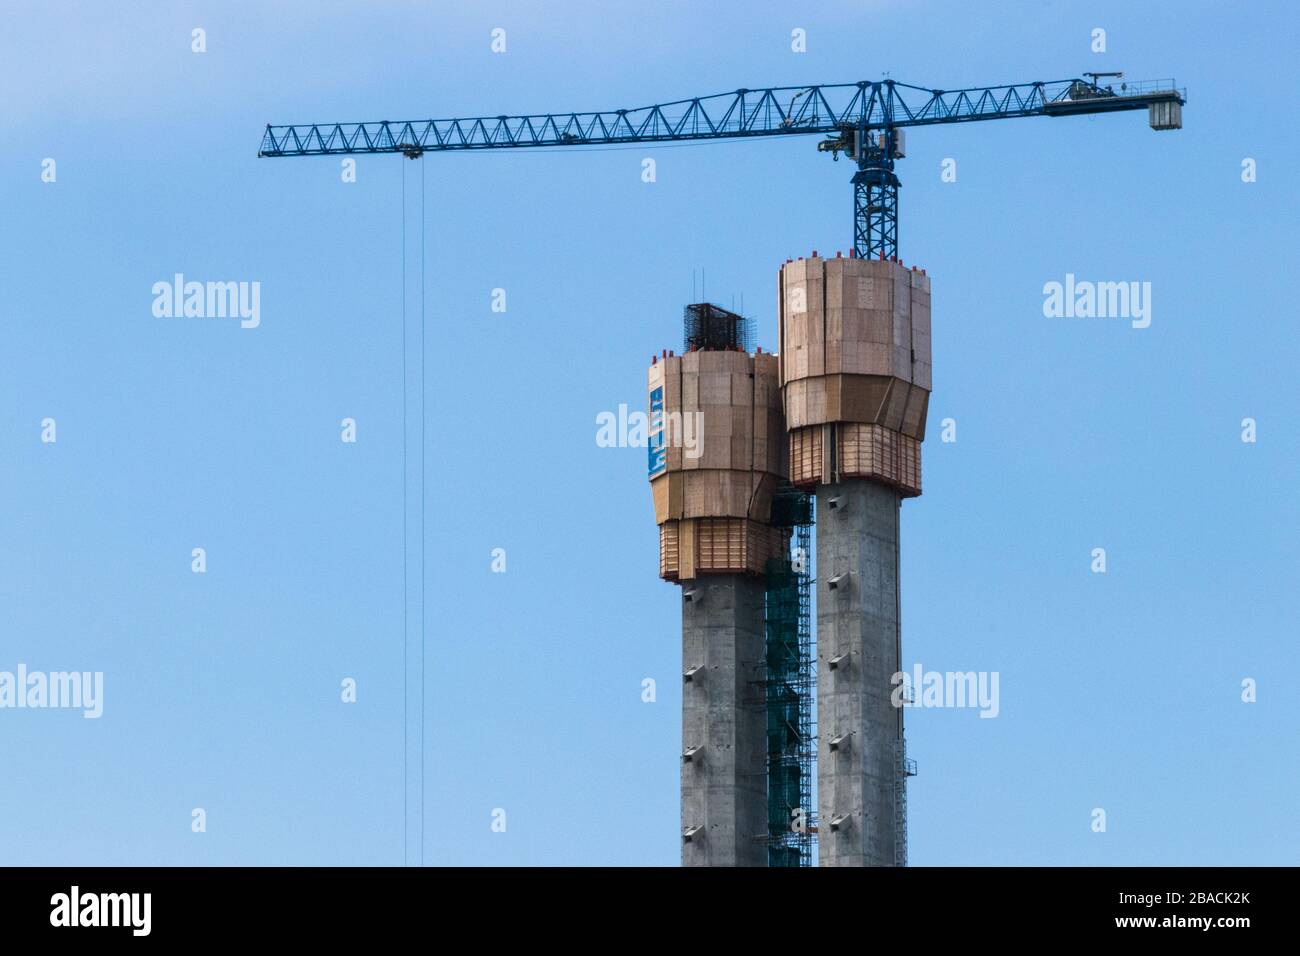 Montreal, Quebec, Canada - Construction of the Towers of Samuel de Champlain Bridge and view of the crane Stock Photo